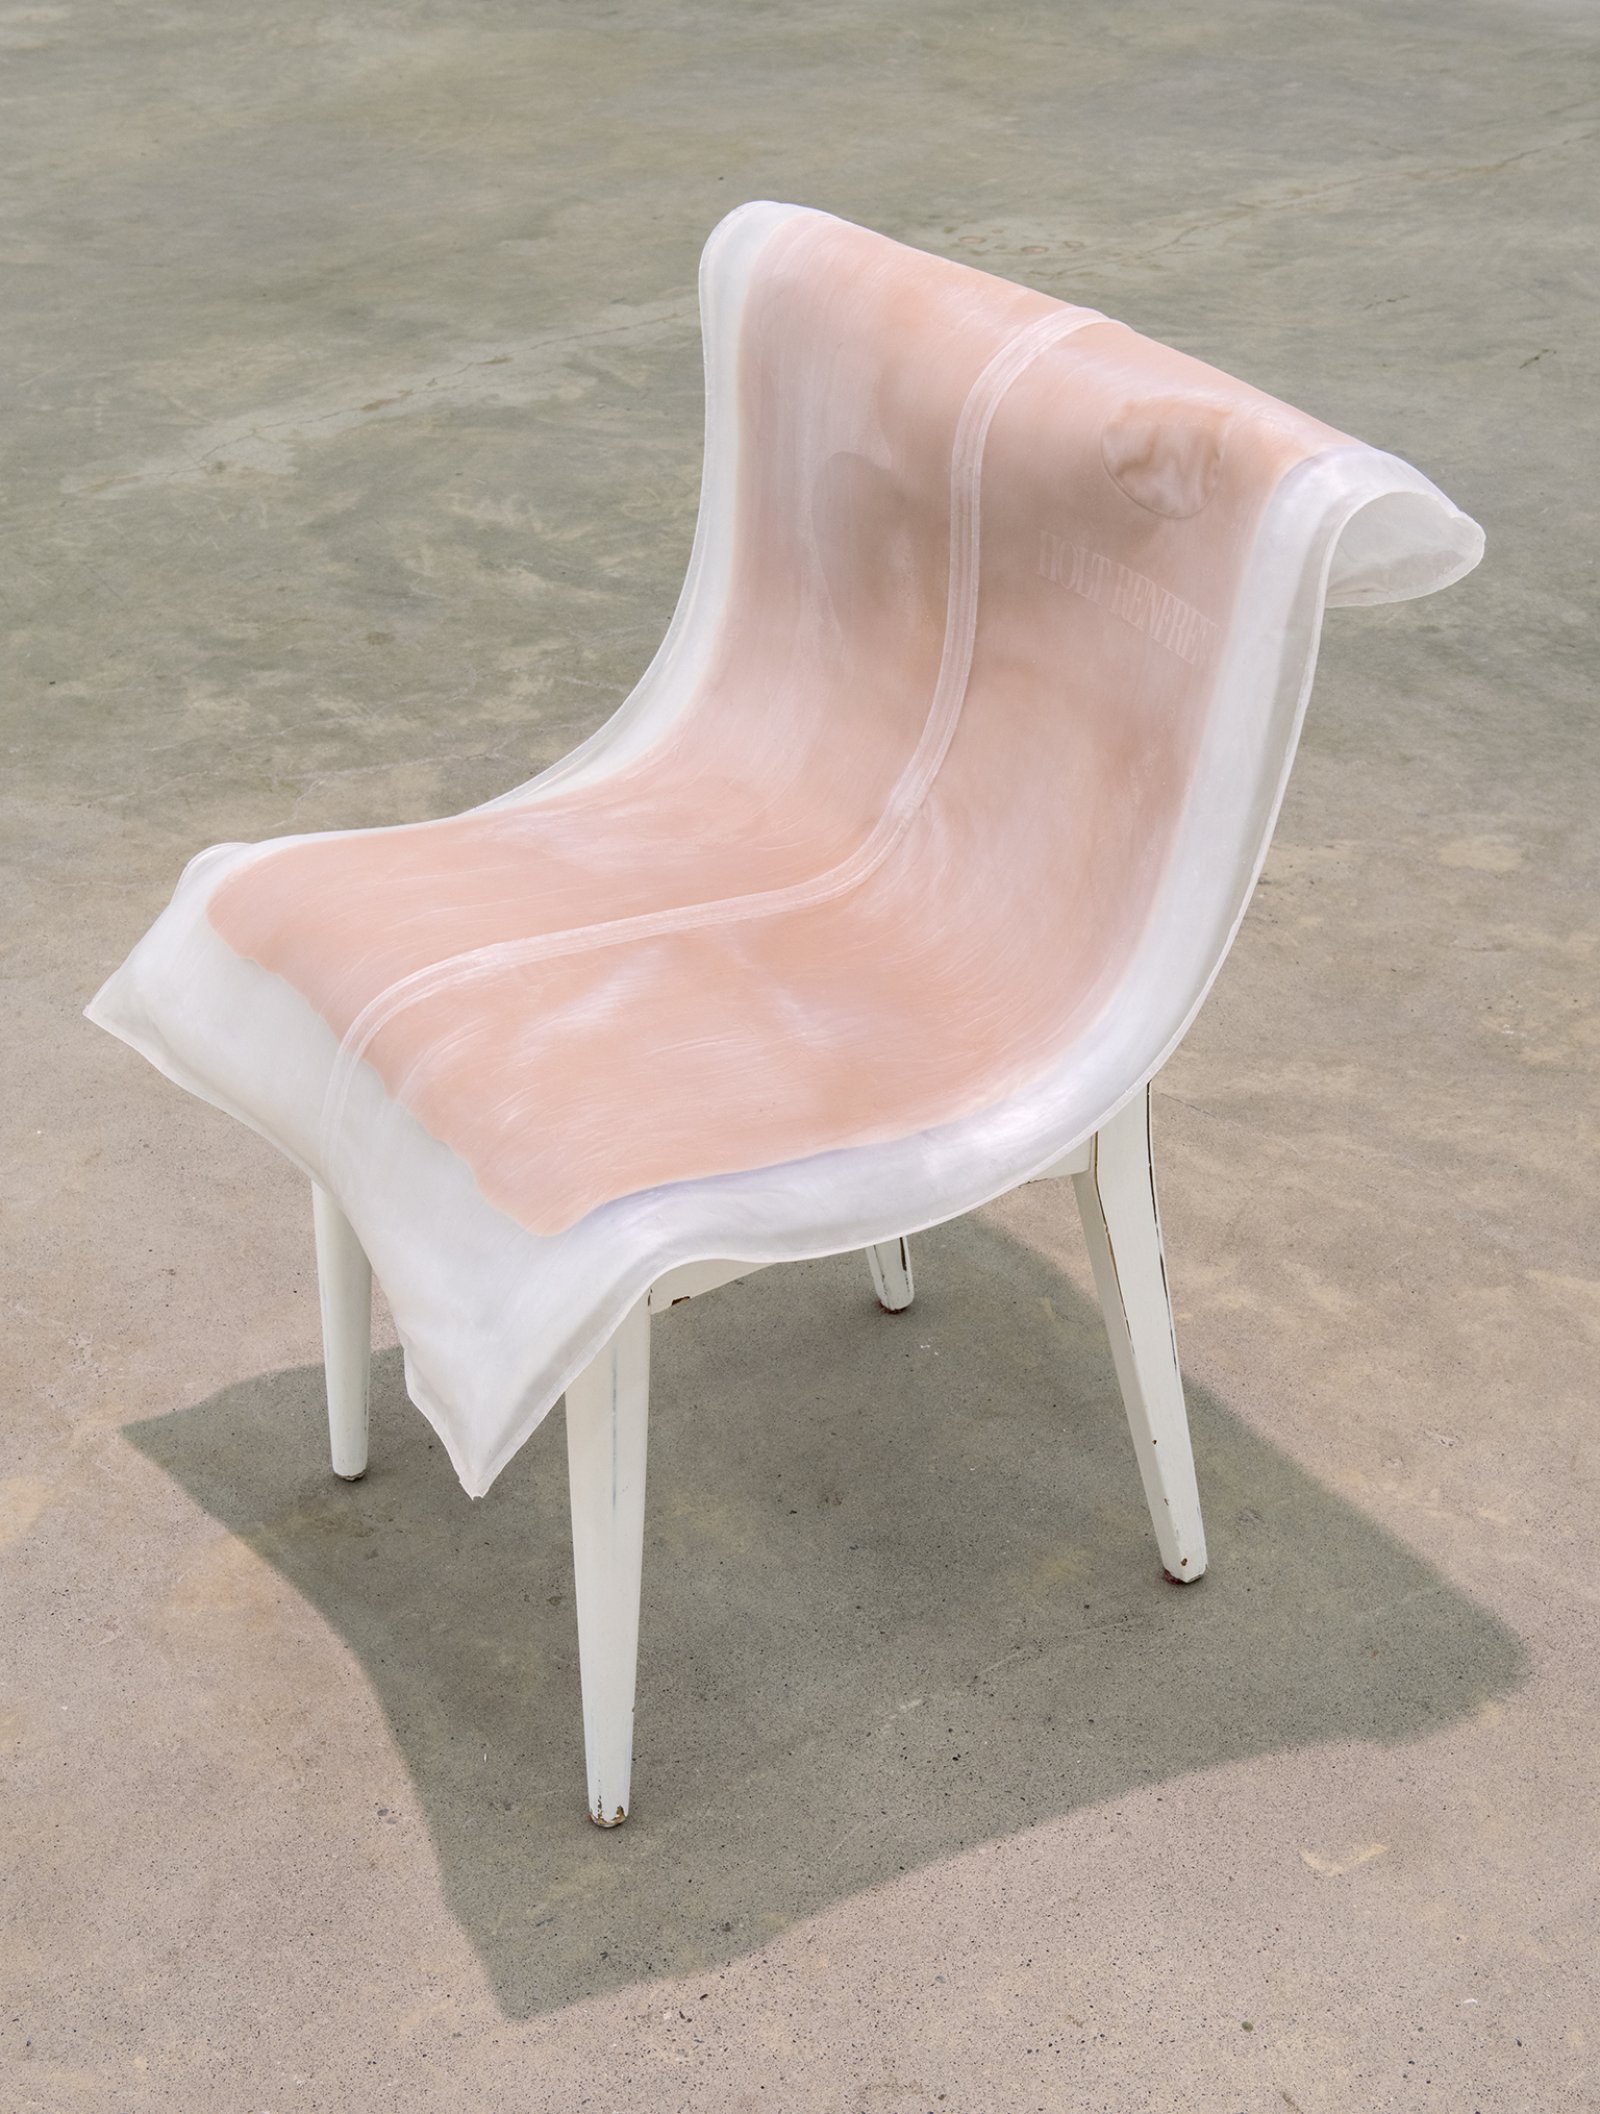 Liz Magor, Casual, 2012, platinum-cure silicone rubber, chair, 32 x 24 x 25 in. (80 x 61 x 64 cm) by Liz Magor